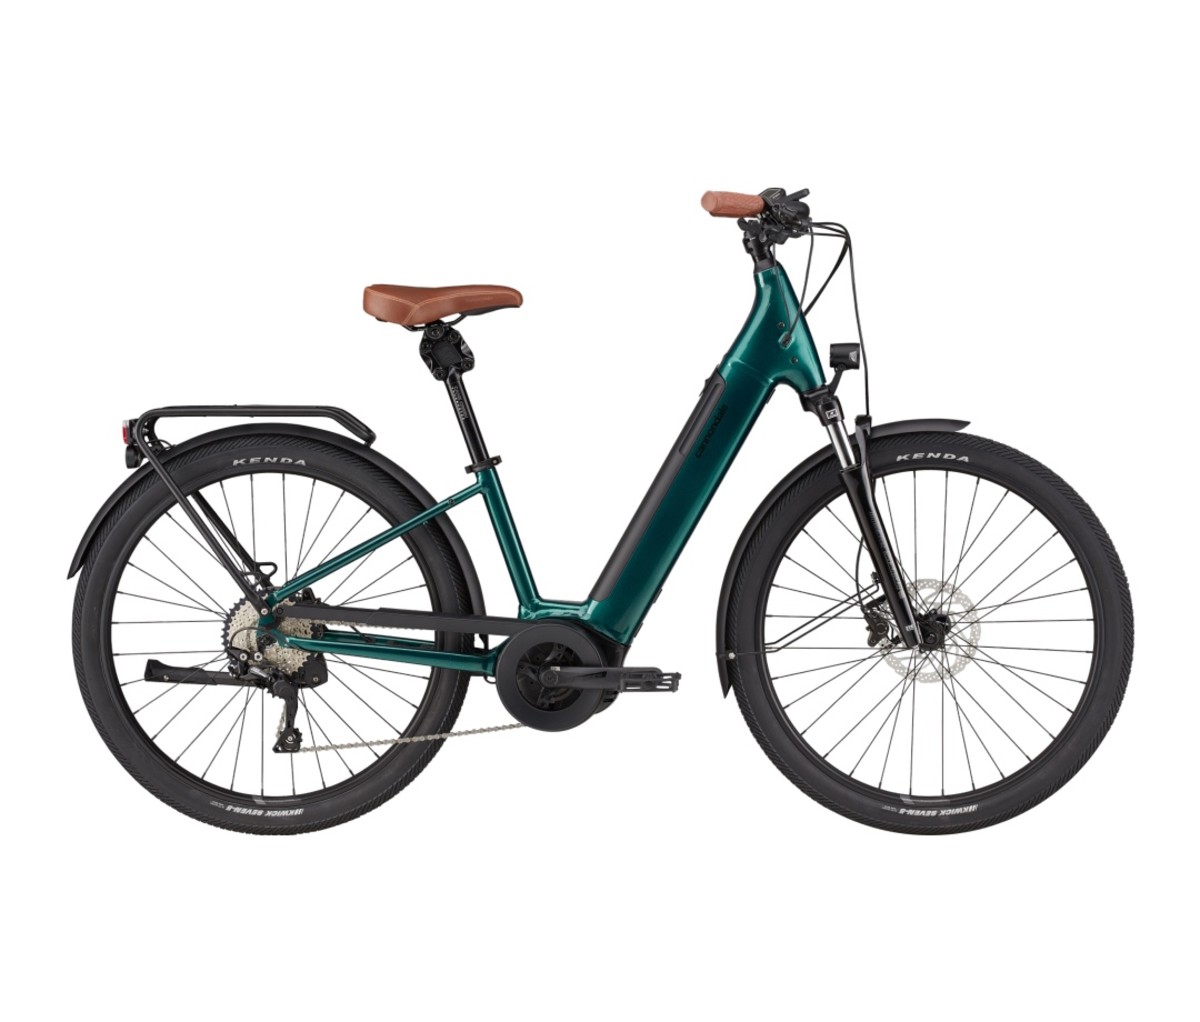 The Cannondale Adventure Neo is a great e-bike for commuting.